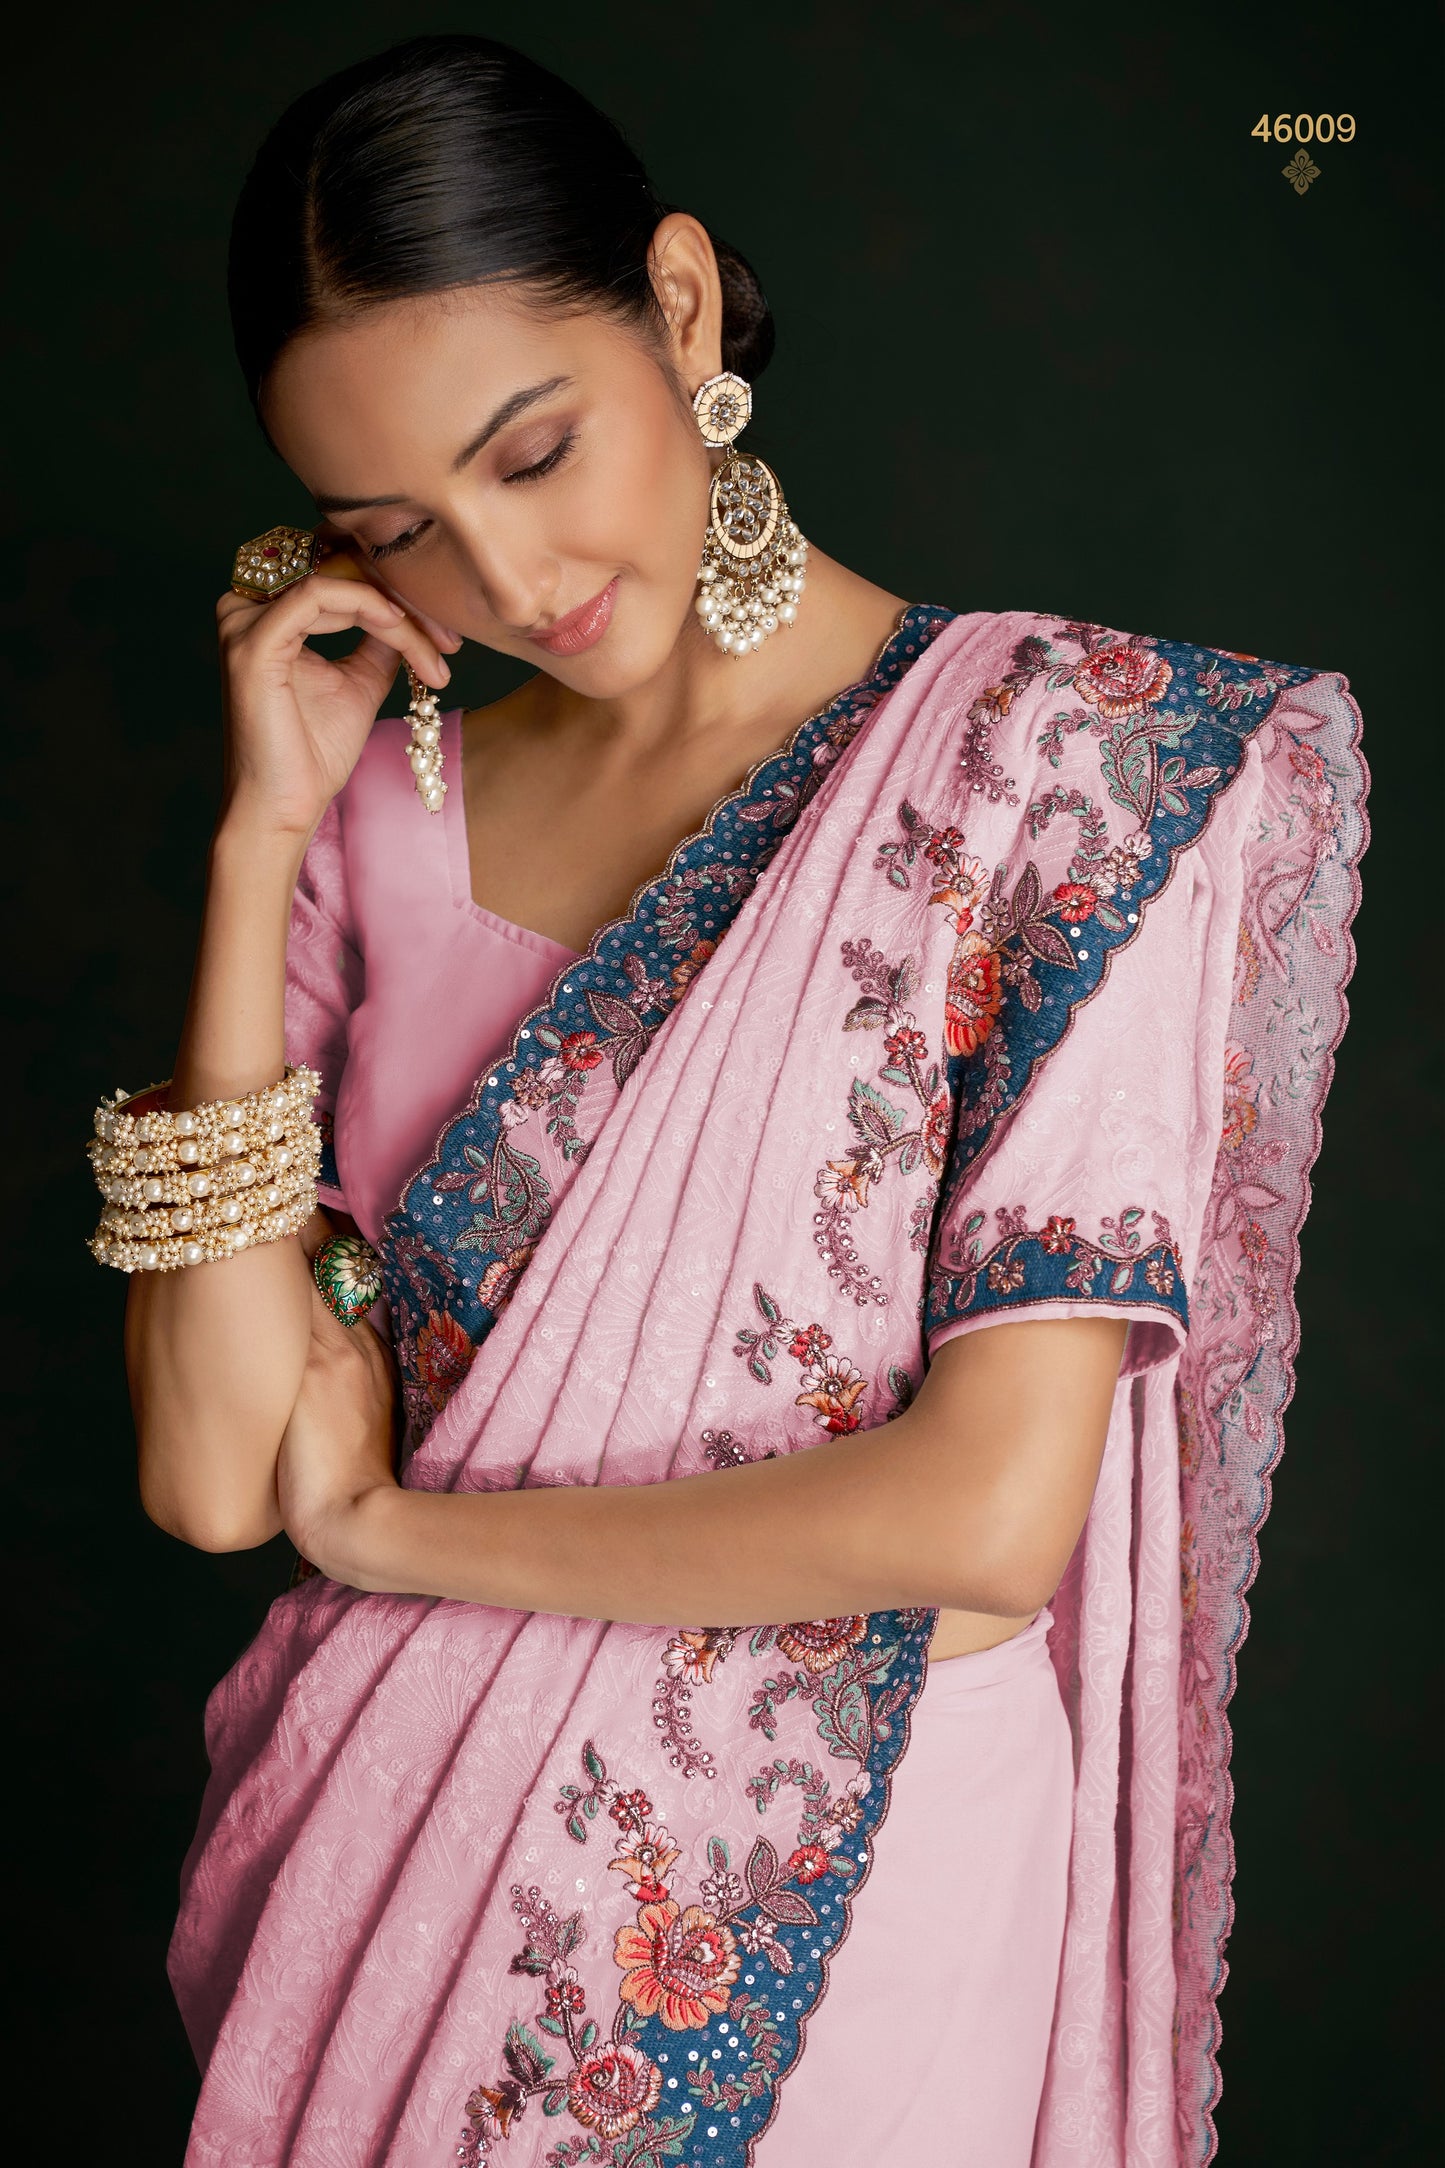 Pink Georgette Floral Sarees with Blouse for Weddings | Indian Sari for Festival - Lucknowi Work